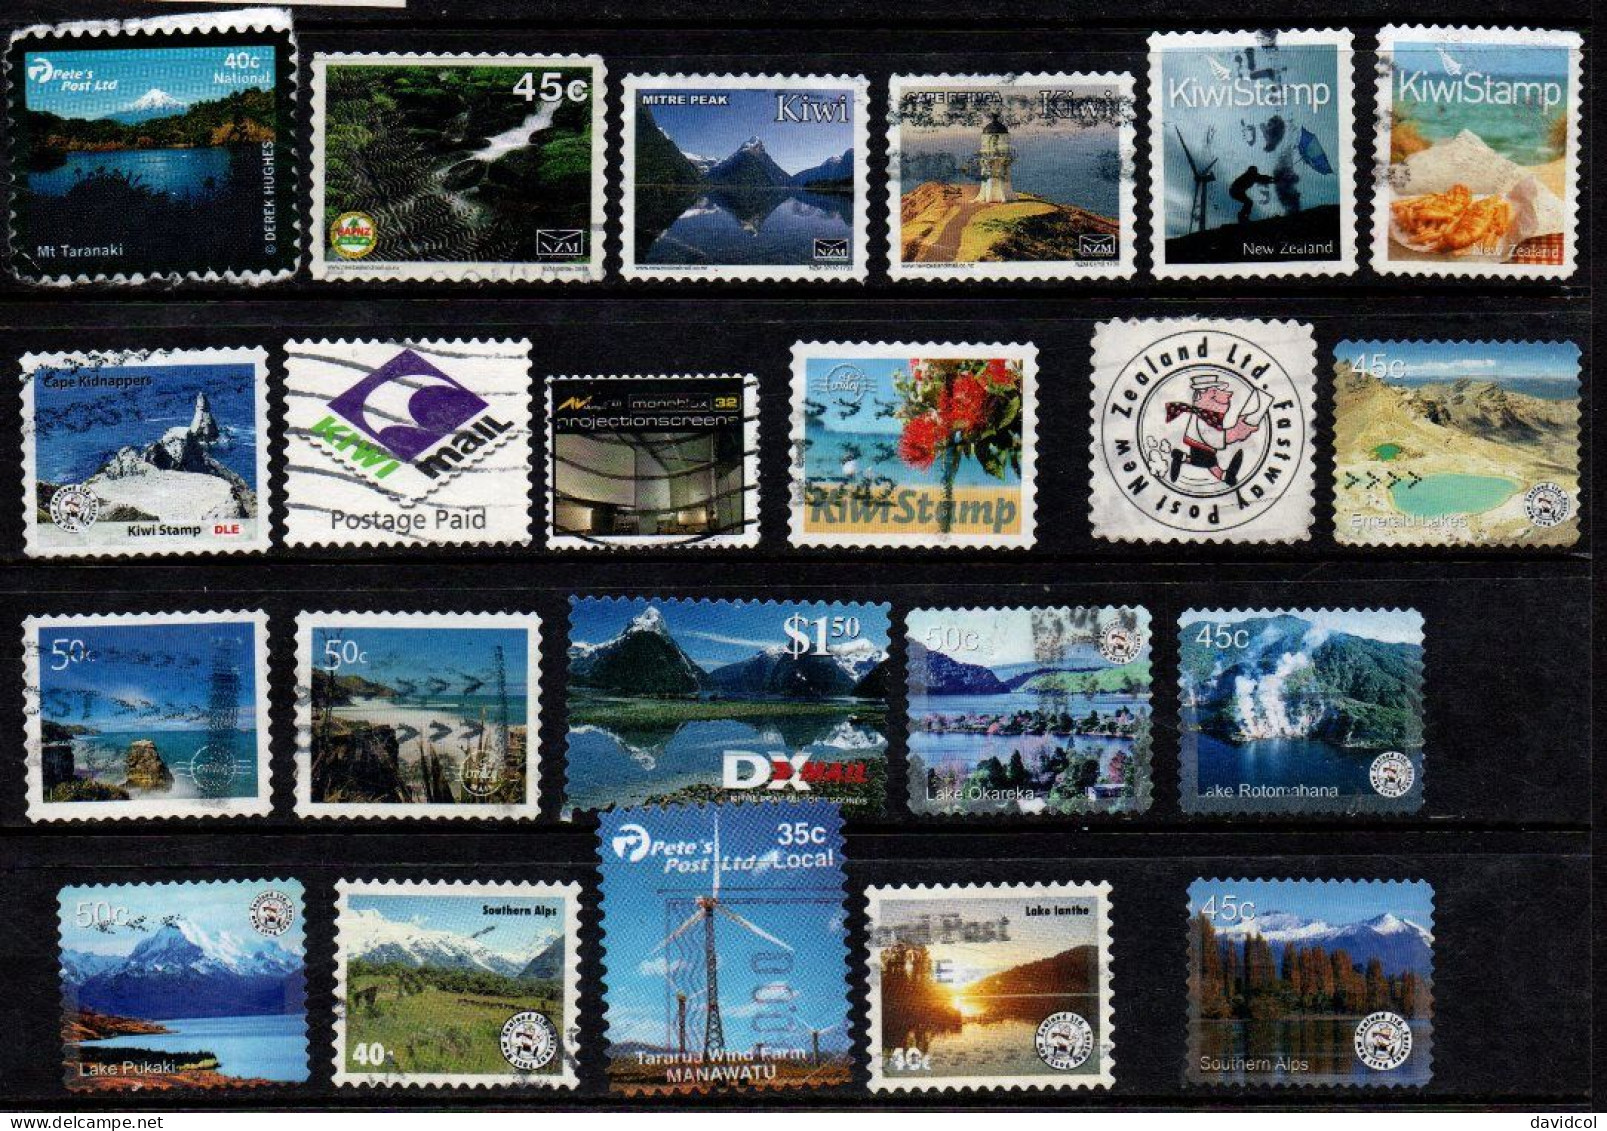 2690D - NEW ZEALAND - 2000'S - USED LOT KIWI, FASTWAY, DXMAIL, PETE'S POST.... - Gebraucht